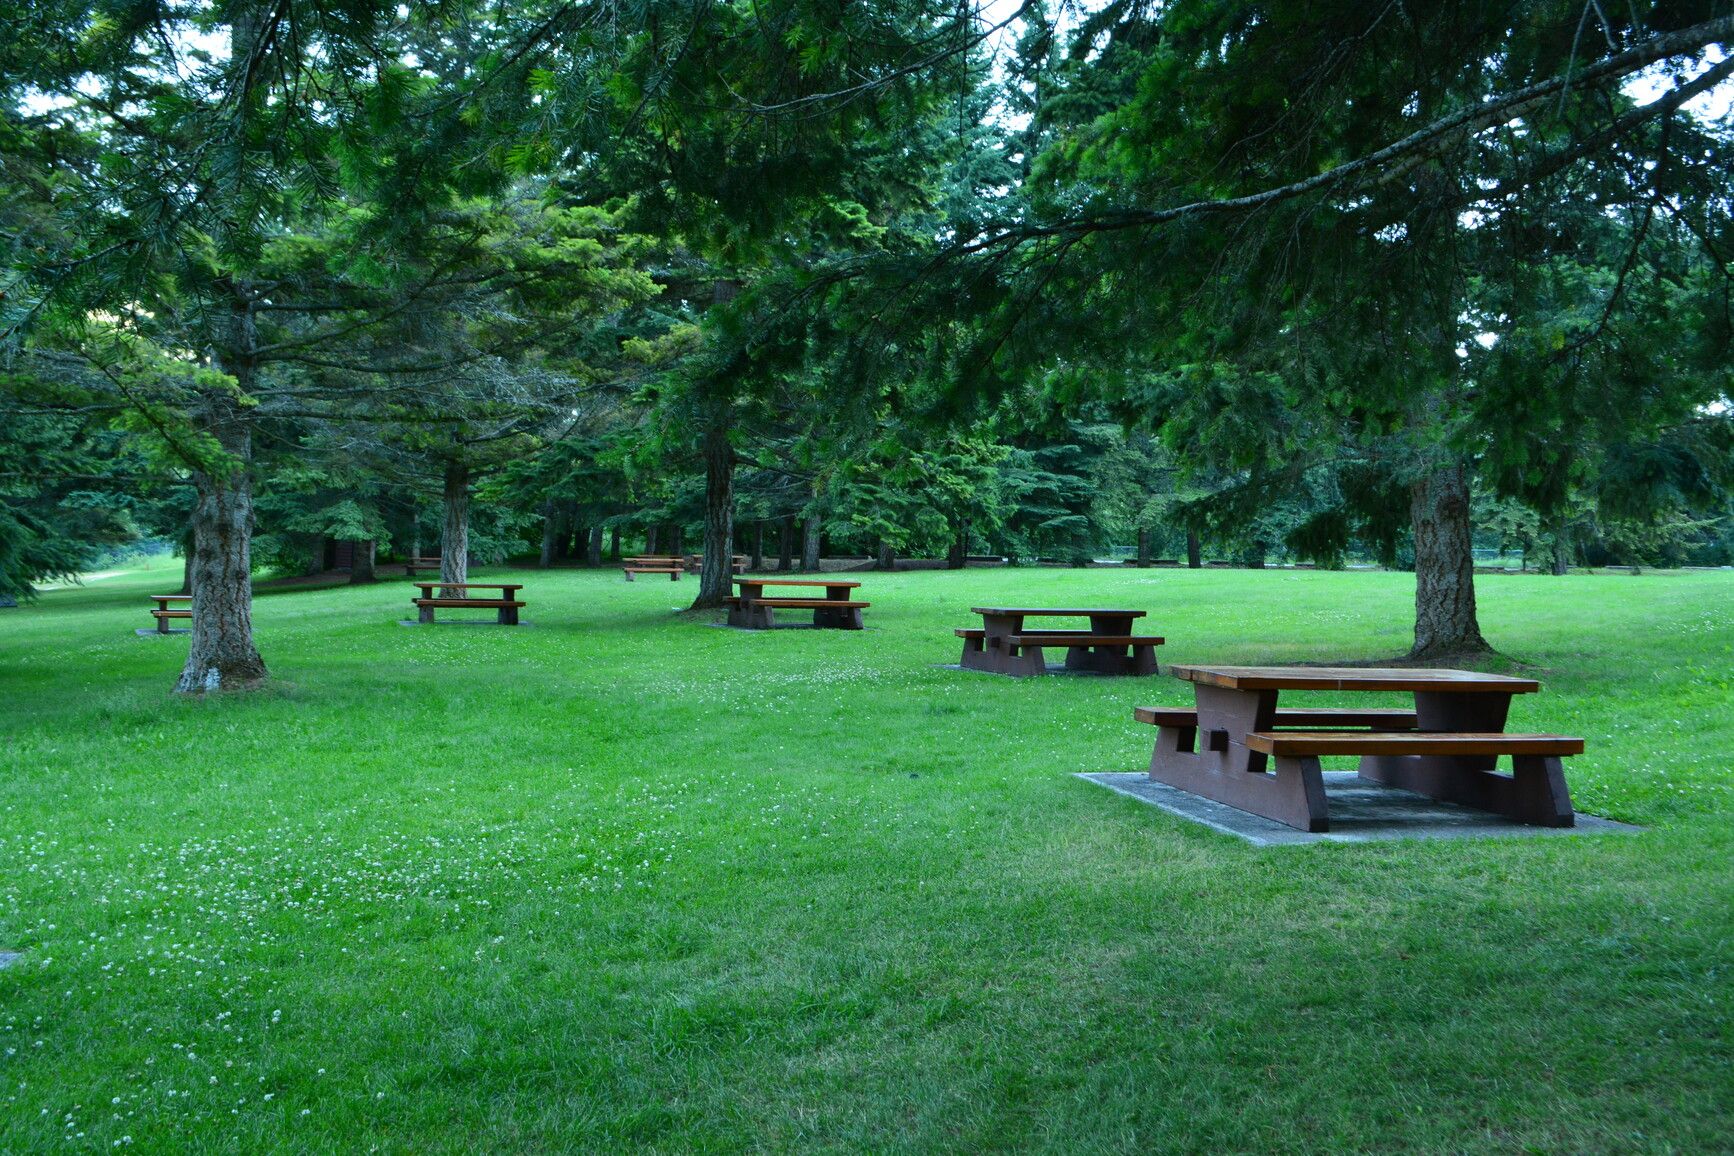 Herald Park day-use picnic area.